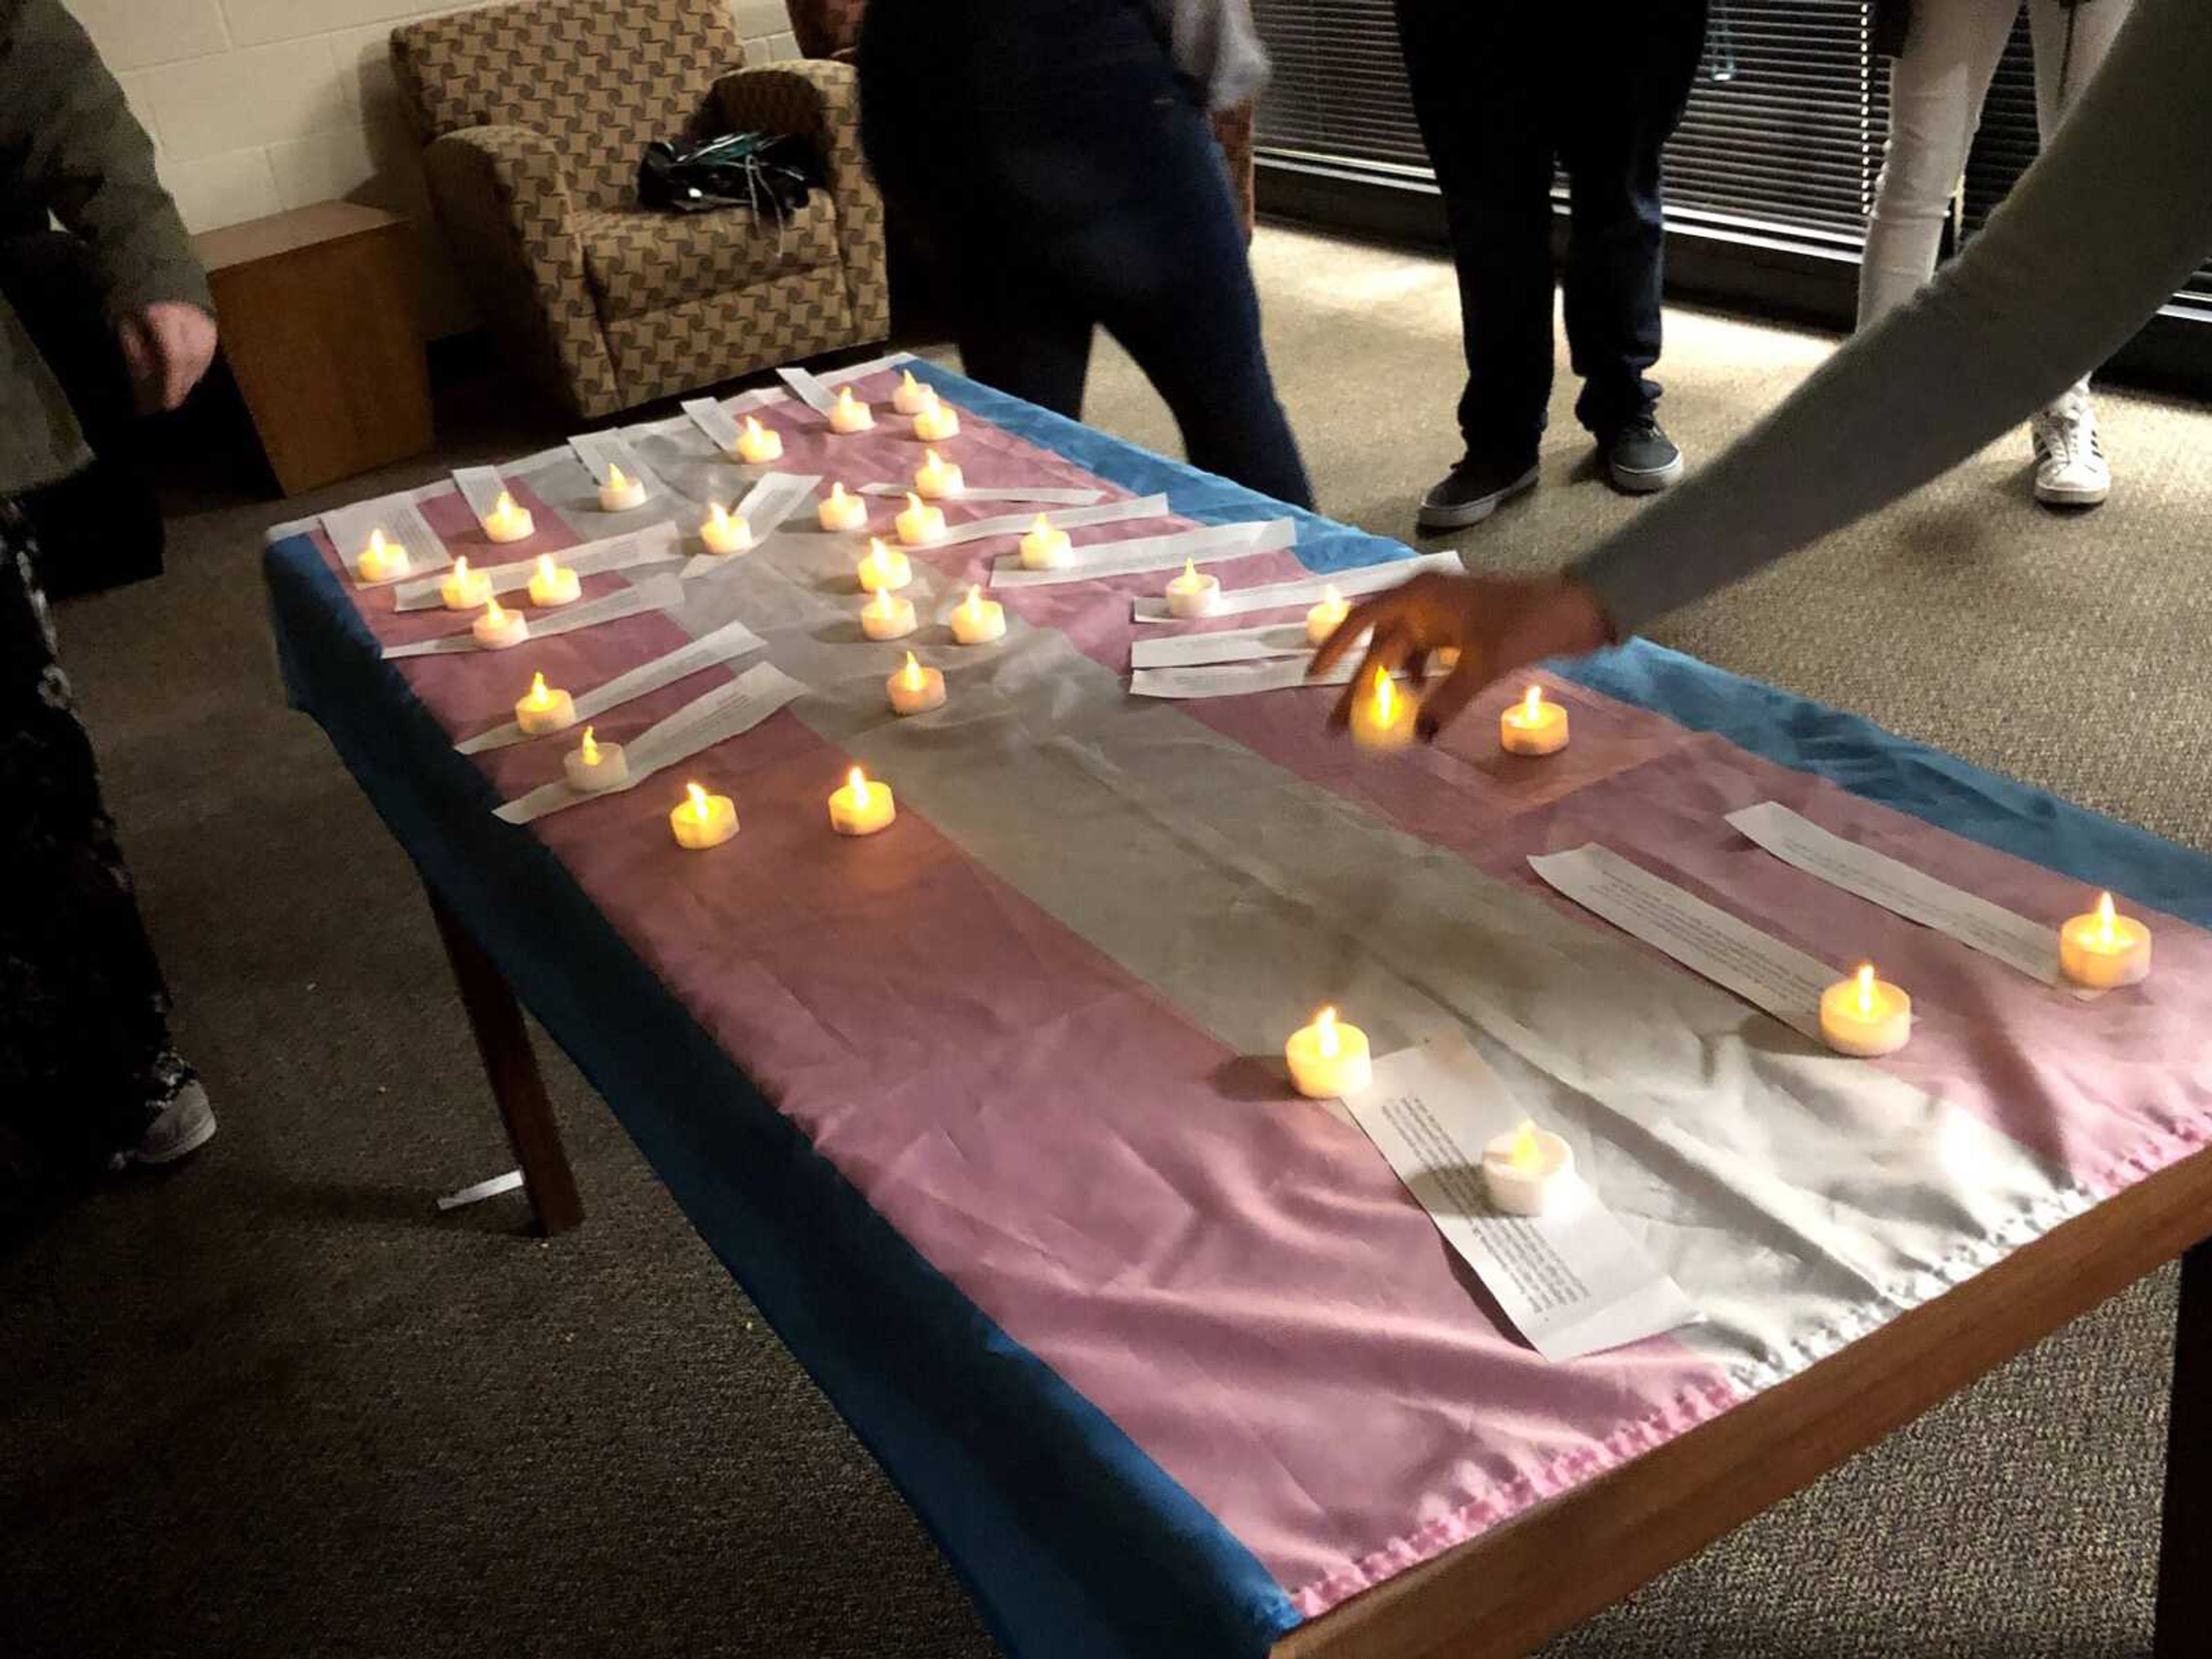 Attendees place candles on top of the transgender flag at the candle lit vigil on Nov. 29 in remembrance of those who were murdered due to their gender identity.